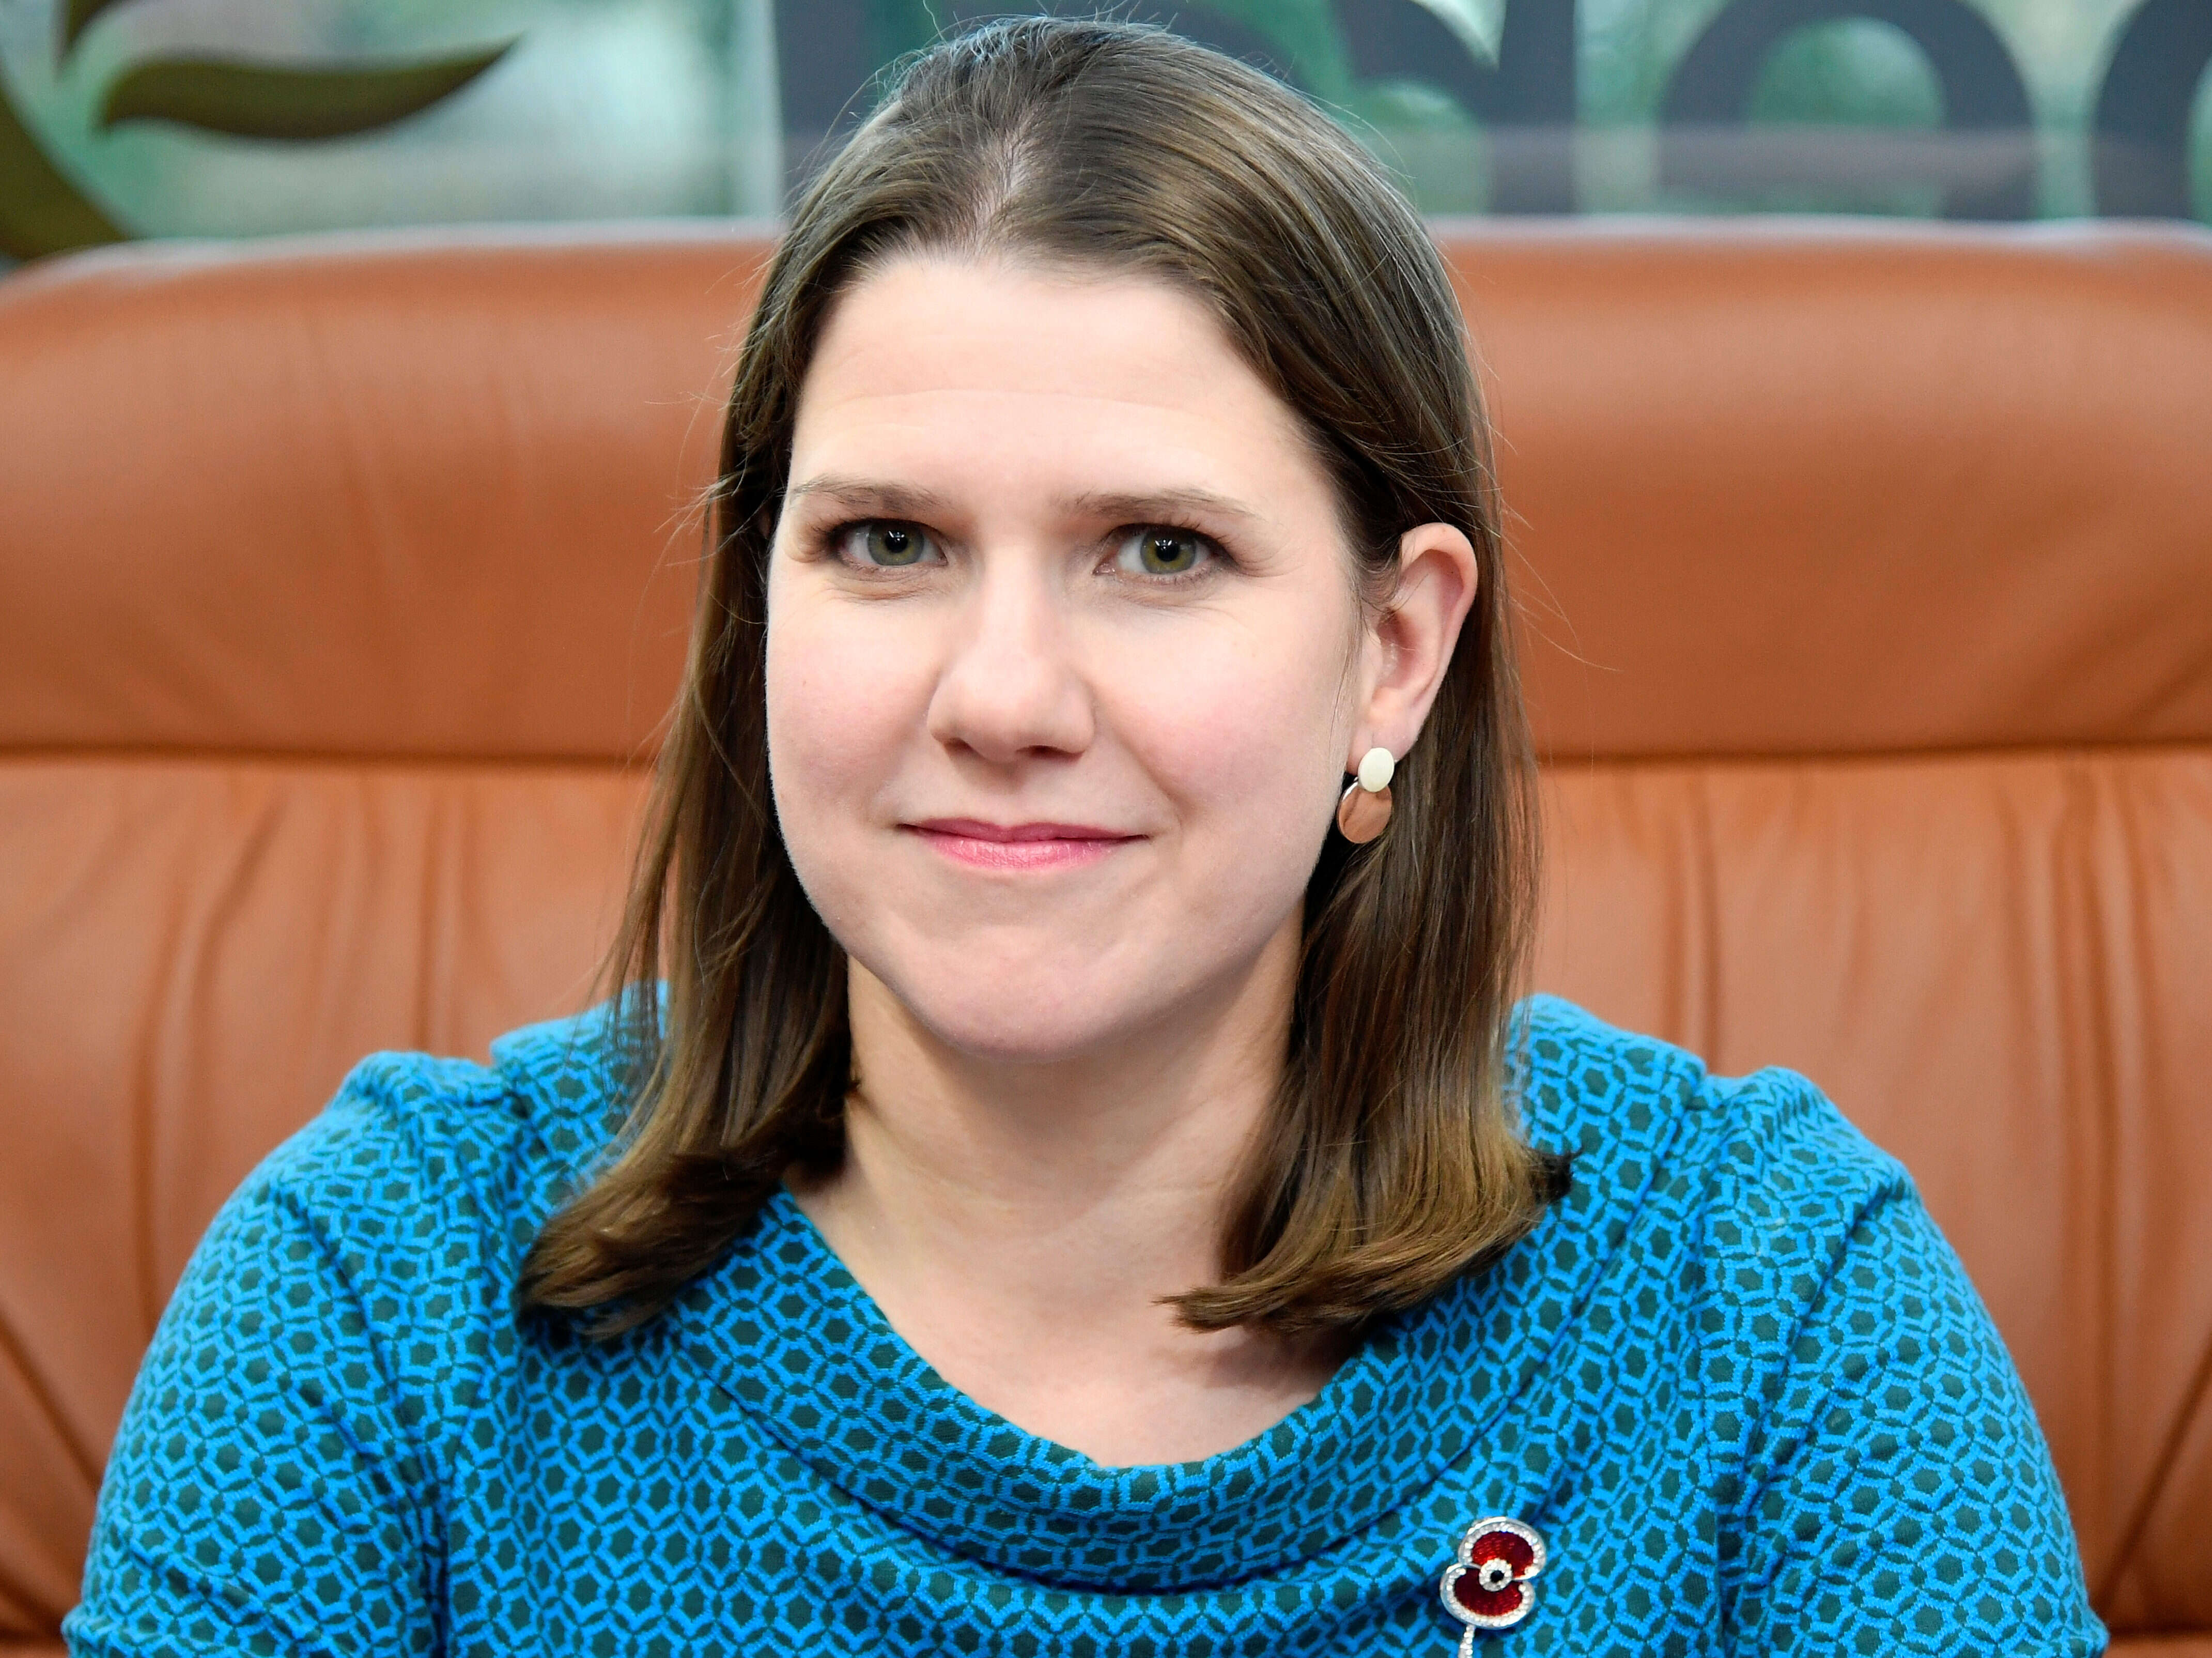 Lib Dems threaten legal action after BBC snubs leader Jo Swinson in planned TV head-to-head